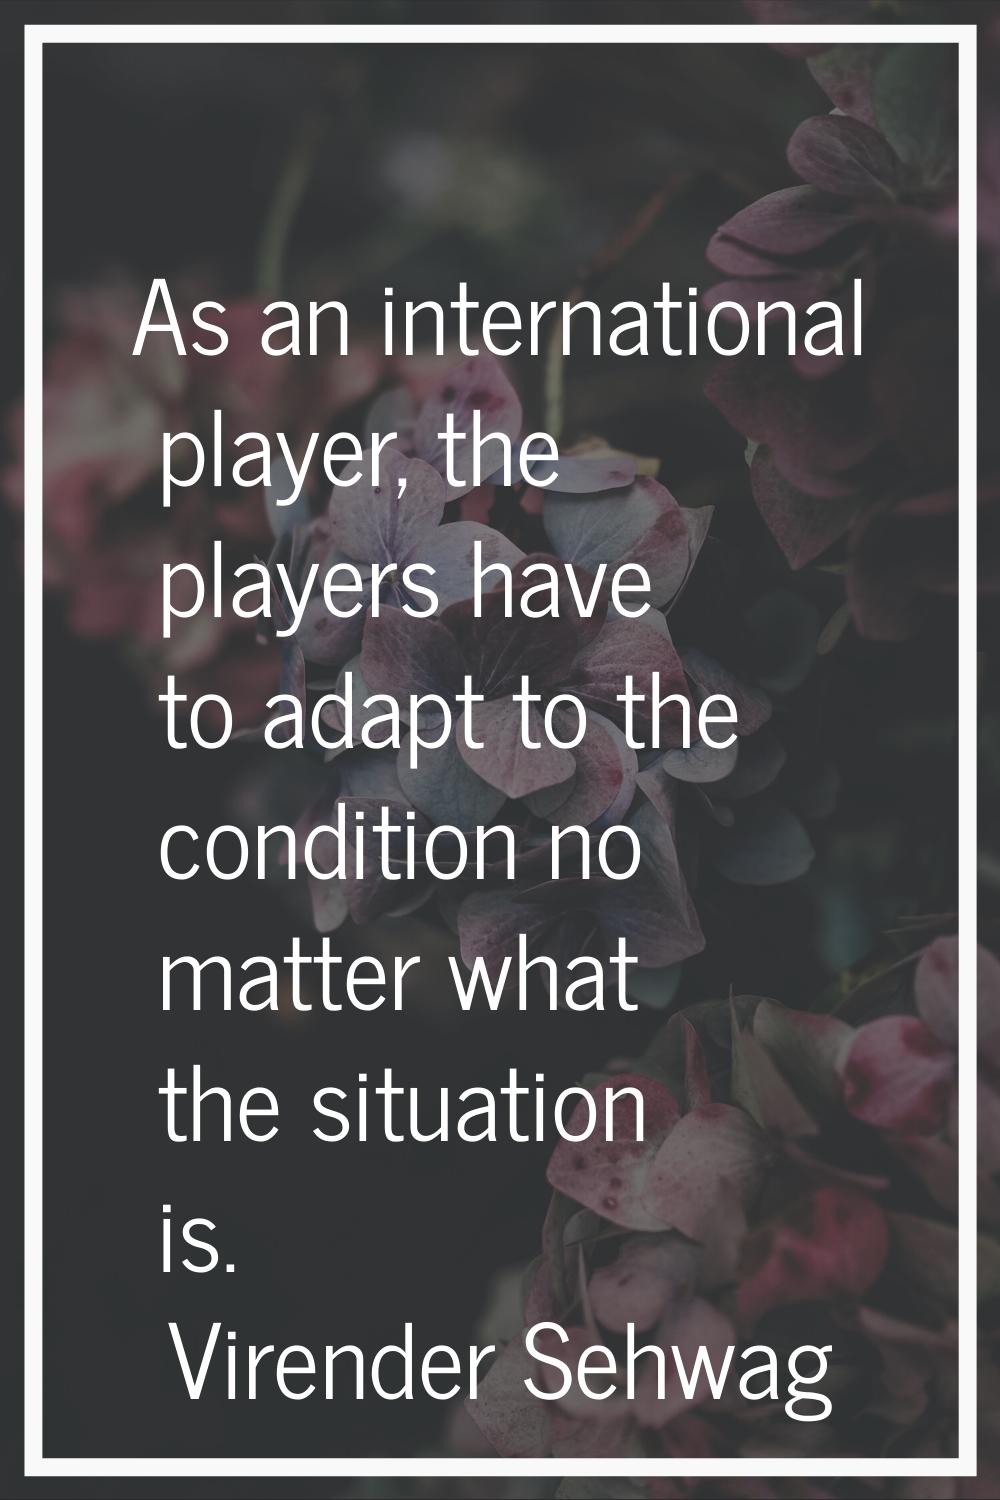 As an international player, the players have to adapt to the condition no matter what the situation